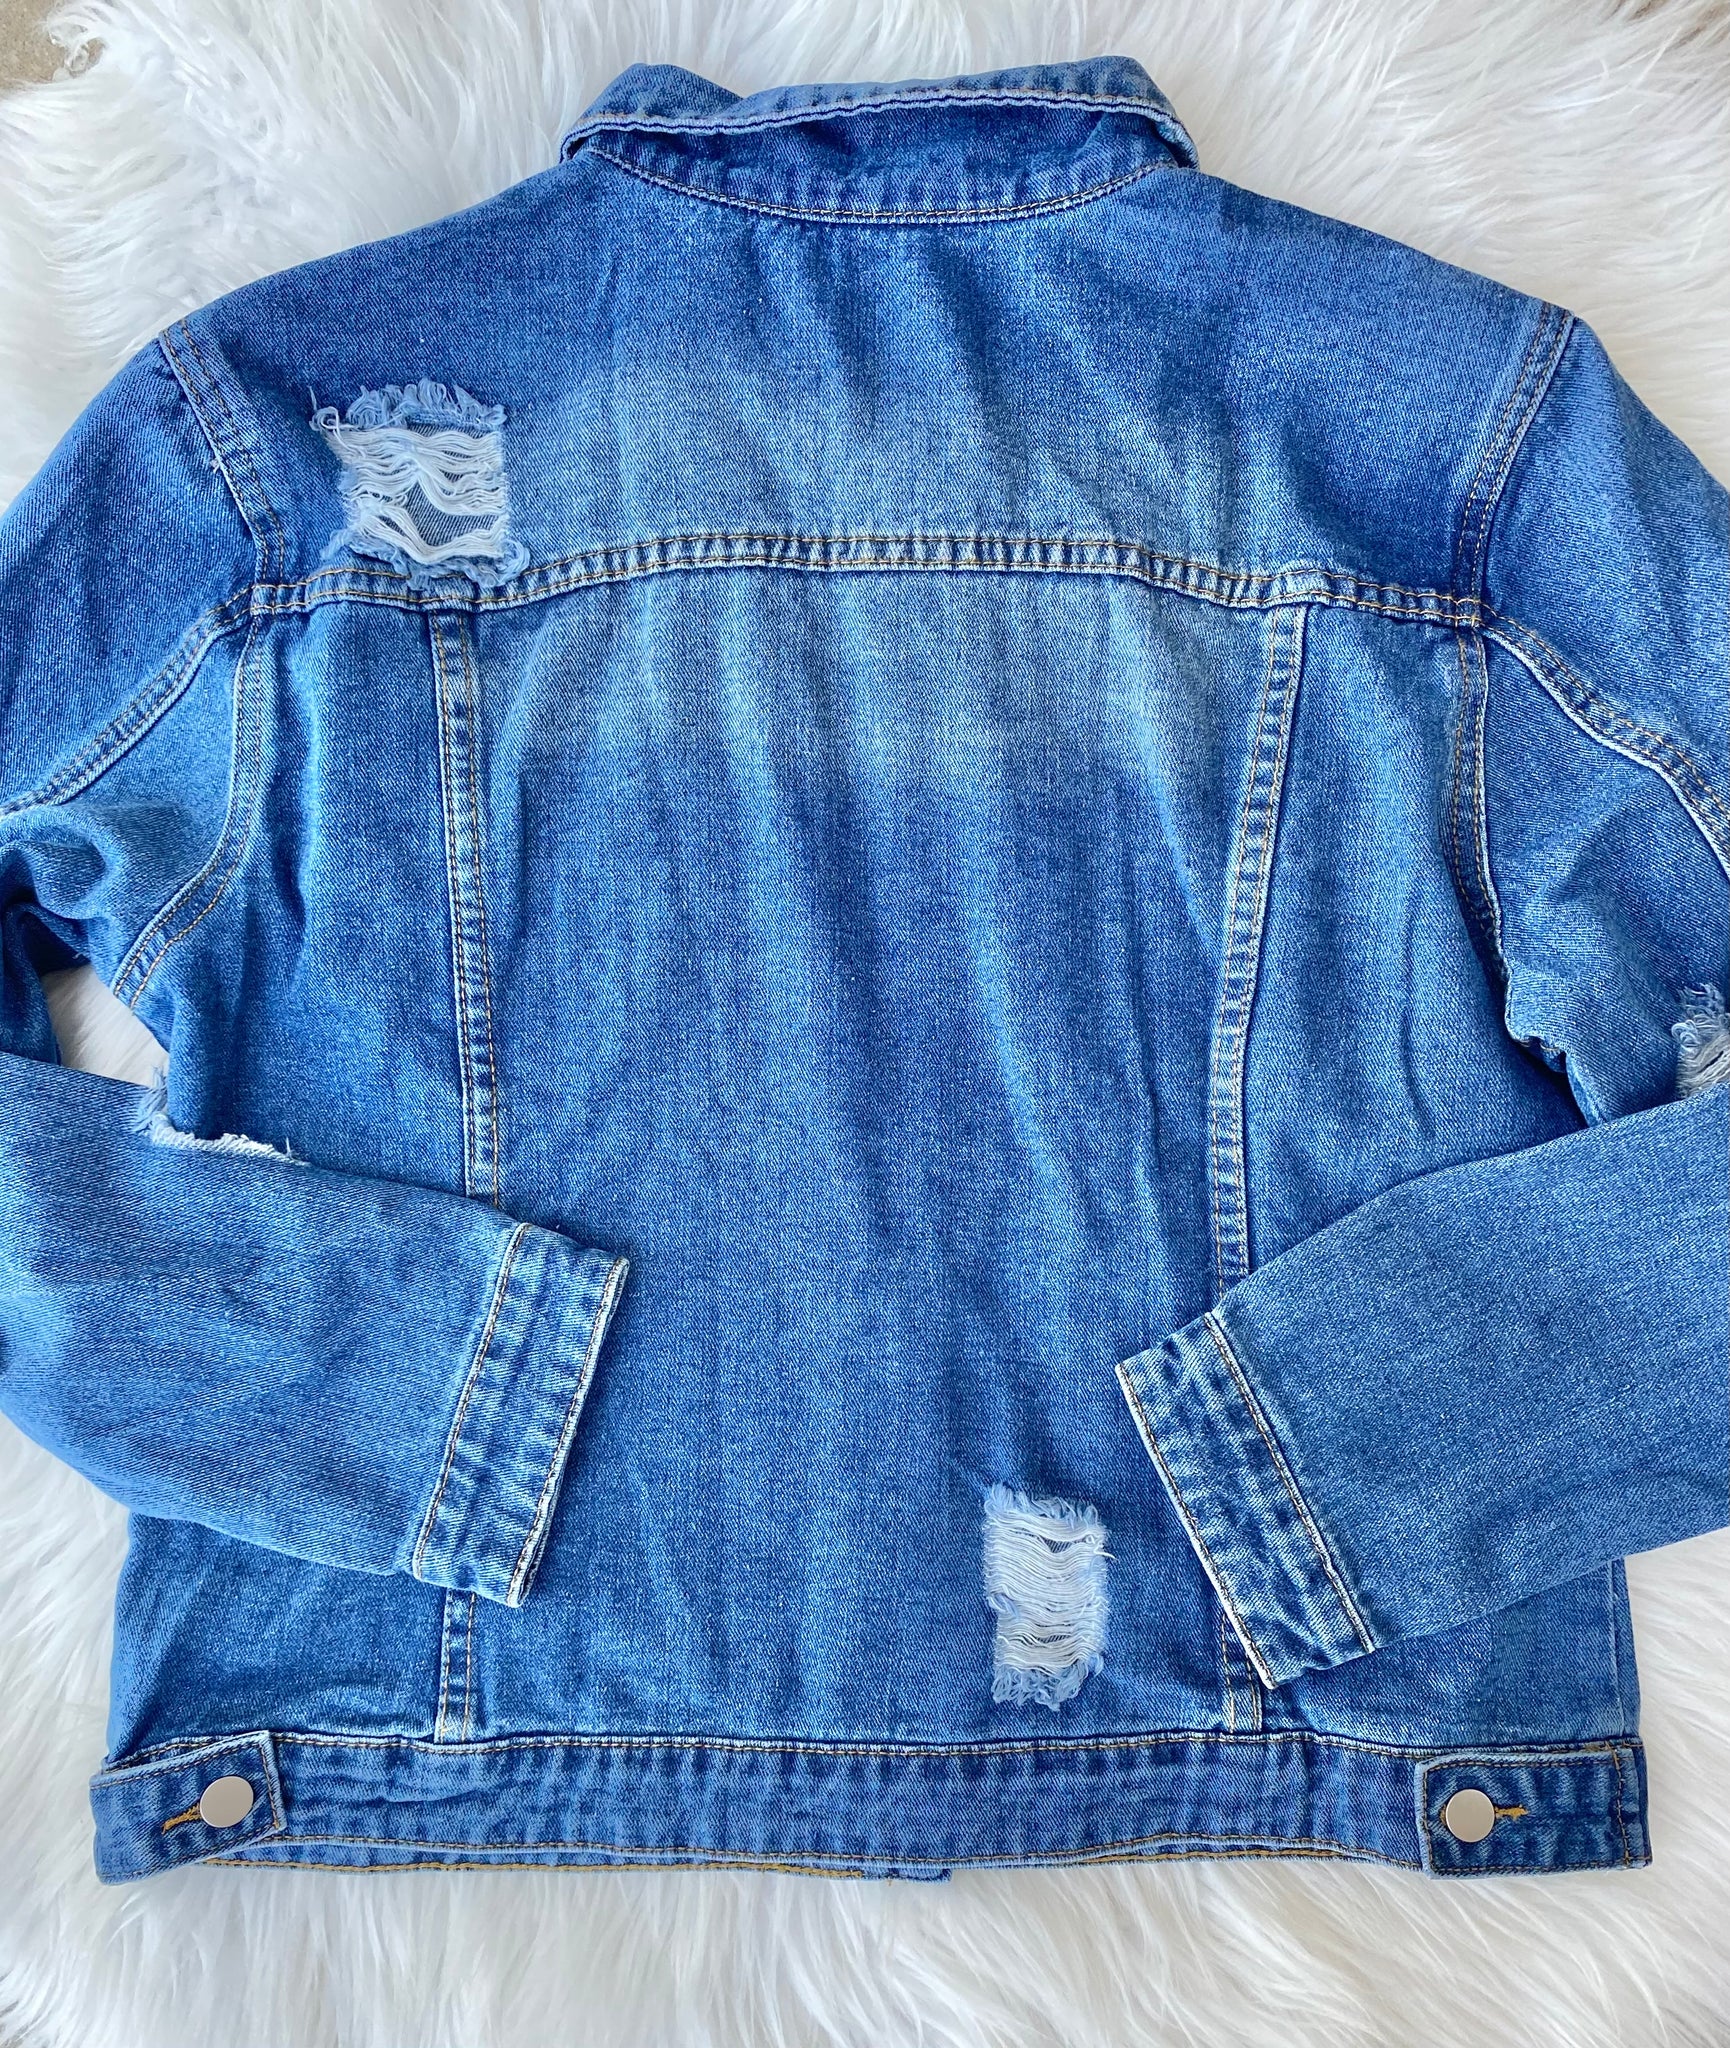 LV Inspired Denim Jackets – The Ranch House